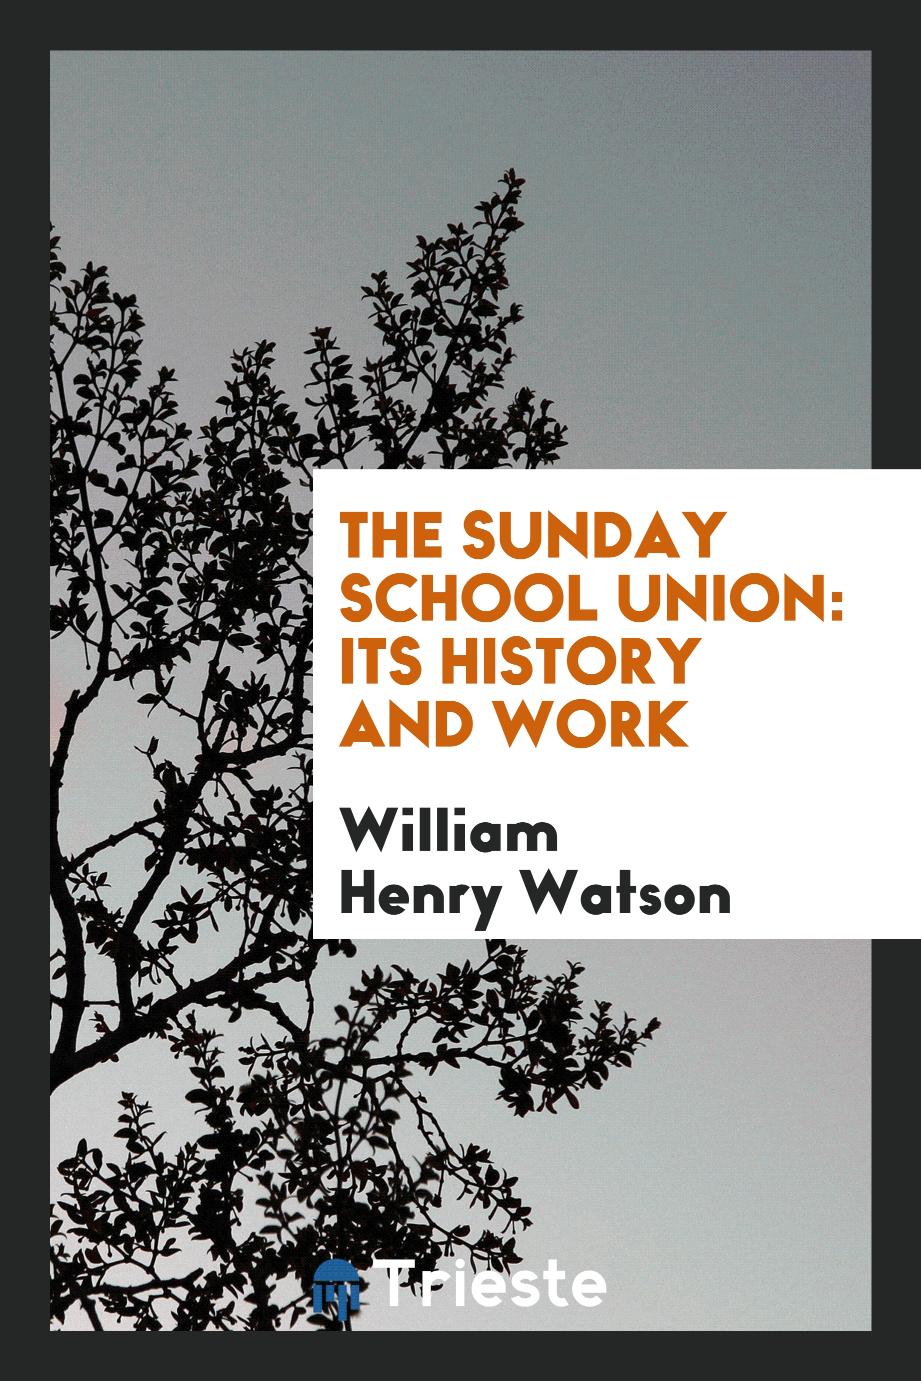 The Sunday School Union: its history and work